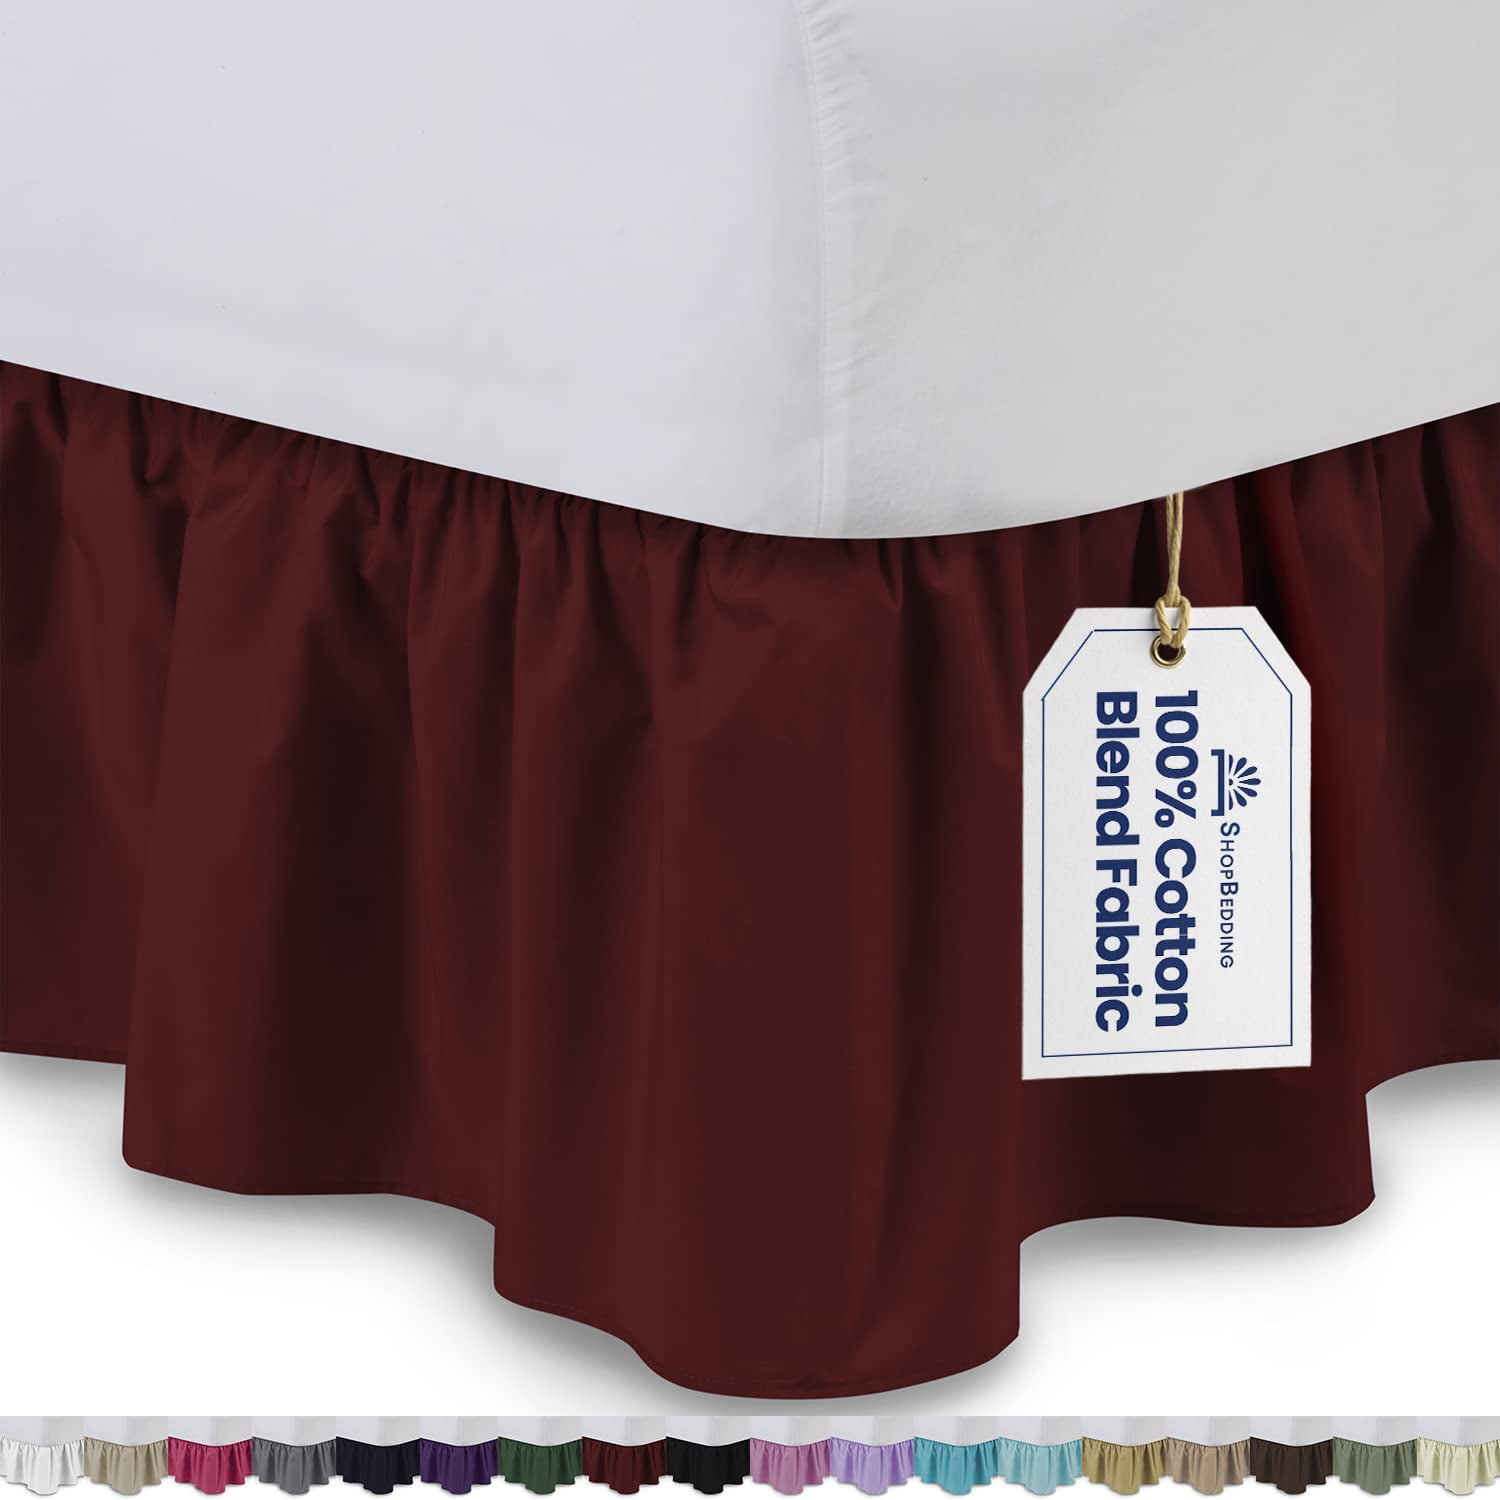 Ruffled Bed Skirt (Queen, Burgundy) 18 Inch Drop Dust Ruffle with Platform,  Poly/Cotton Fabric, Available in All Bed Sizes and 14 Colors - Blissford